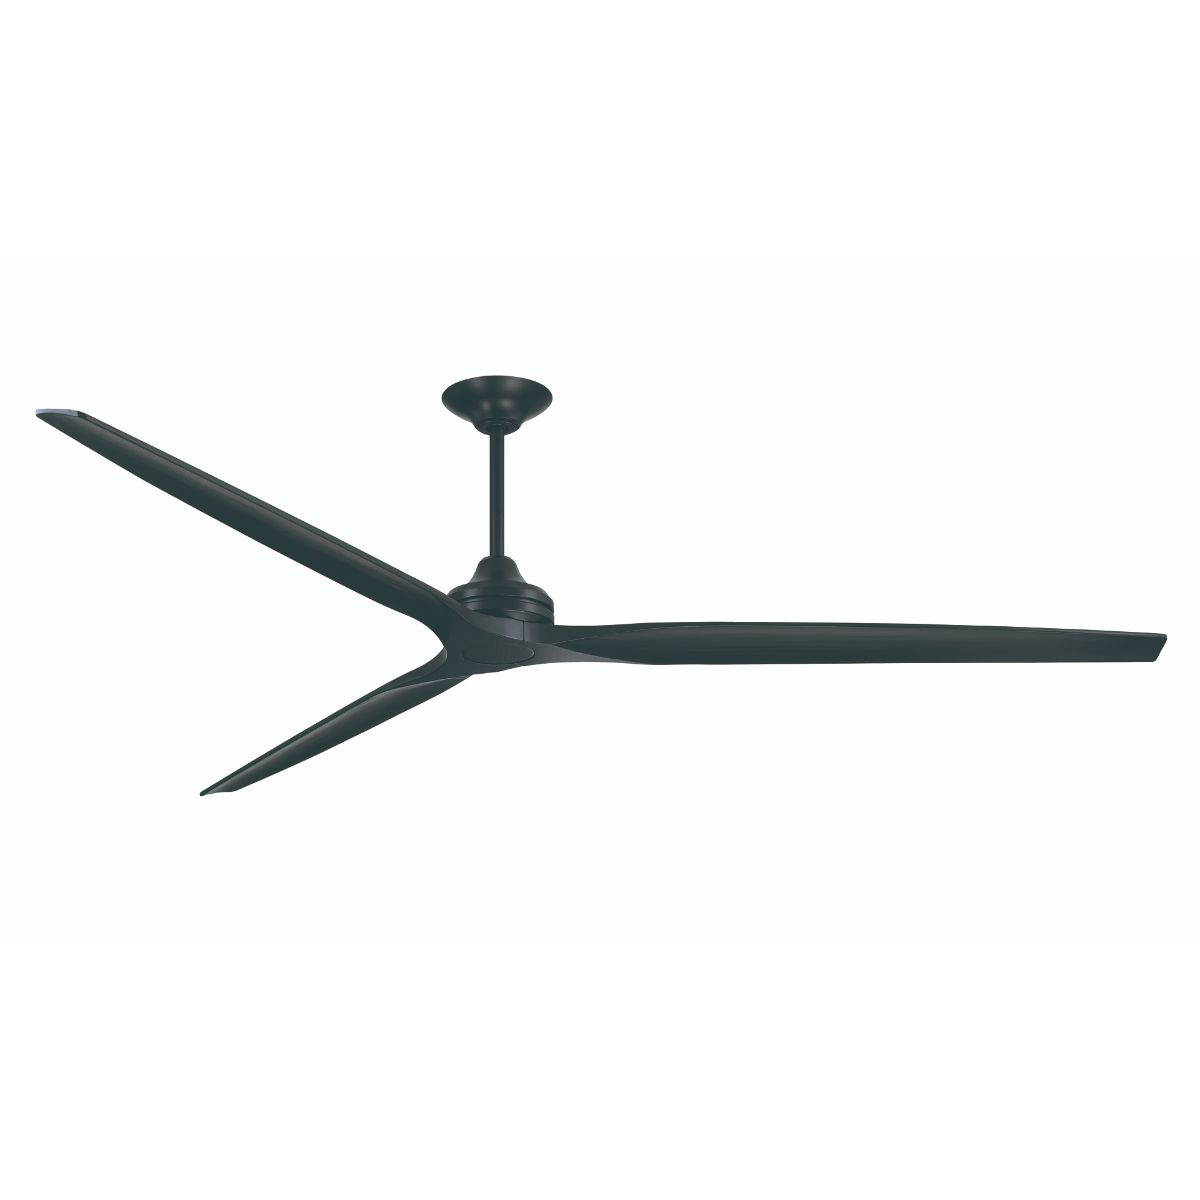 Spitfire DC Outdoor Ceiling Fan Motor With Remote, Black Finish, Set of 3 Blades Sold Separately